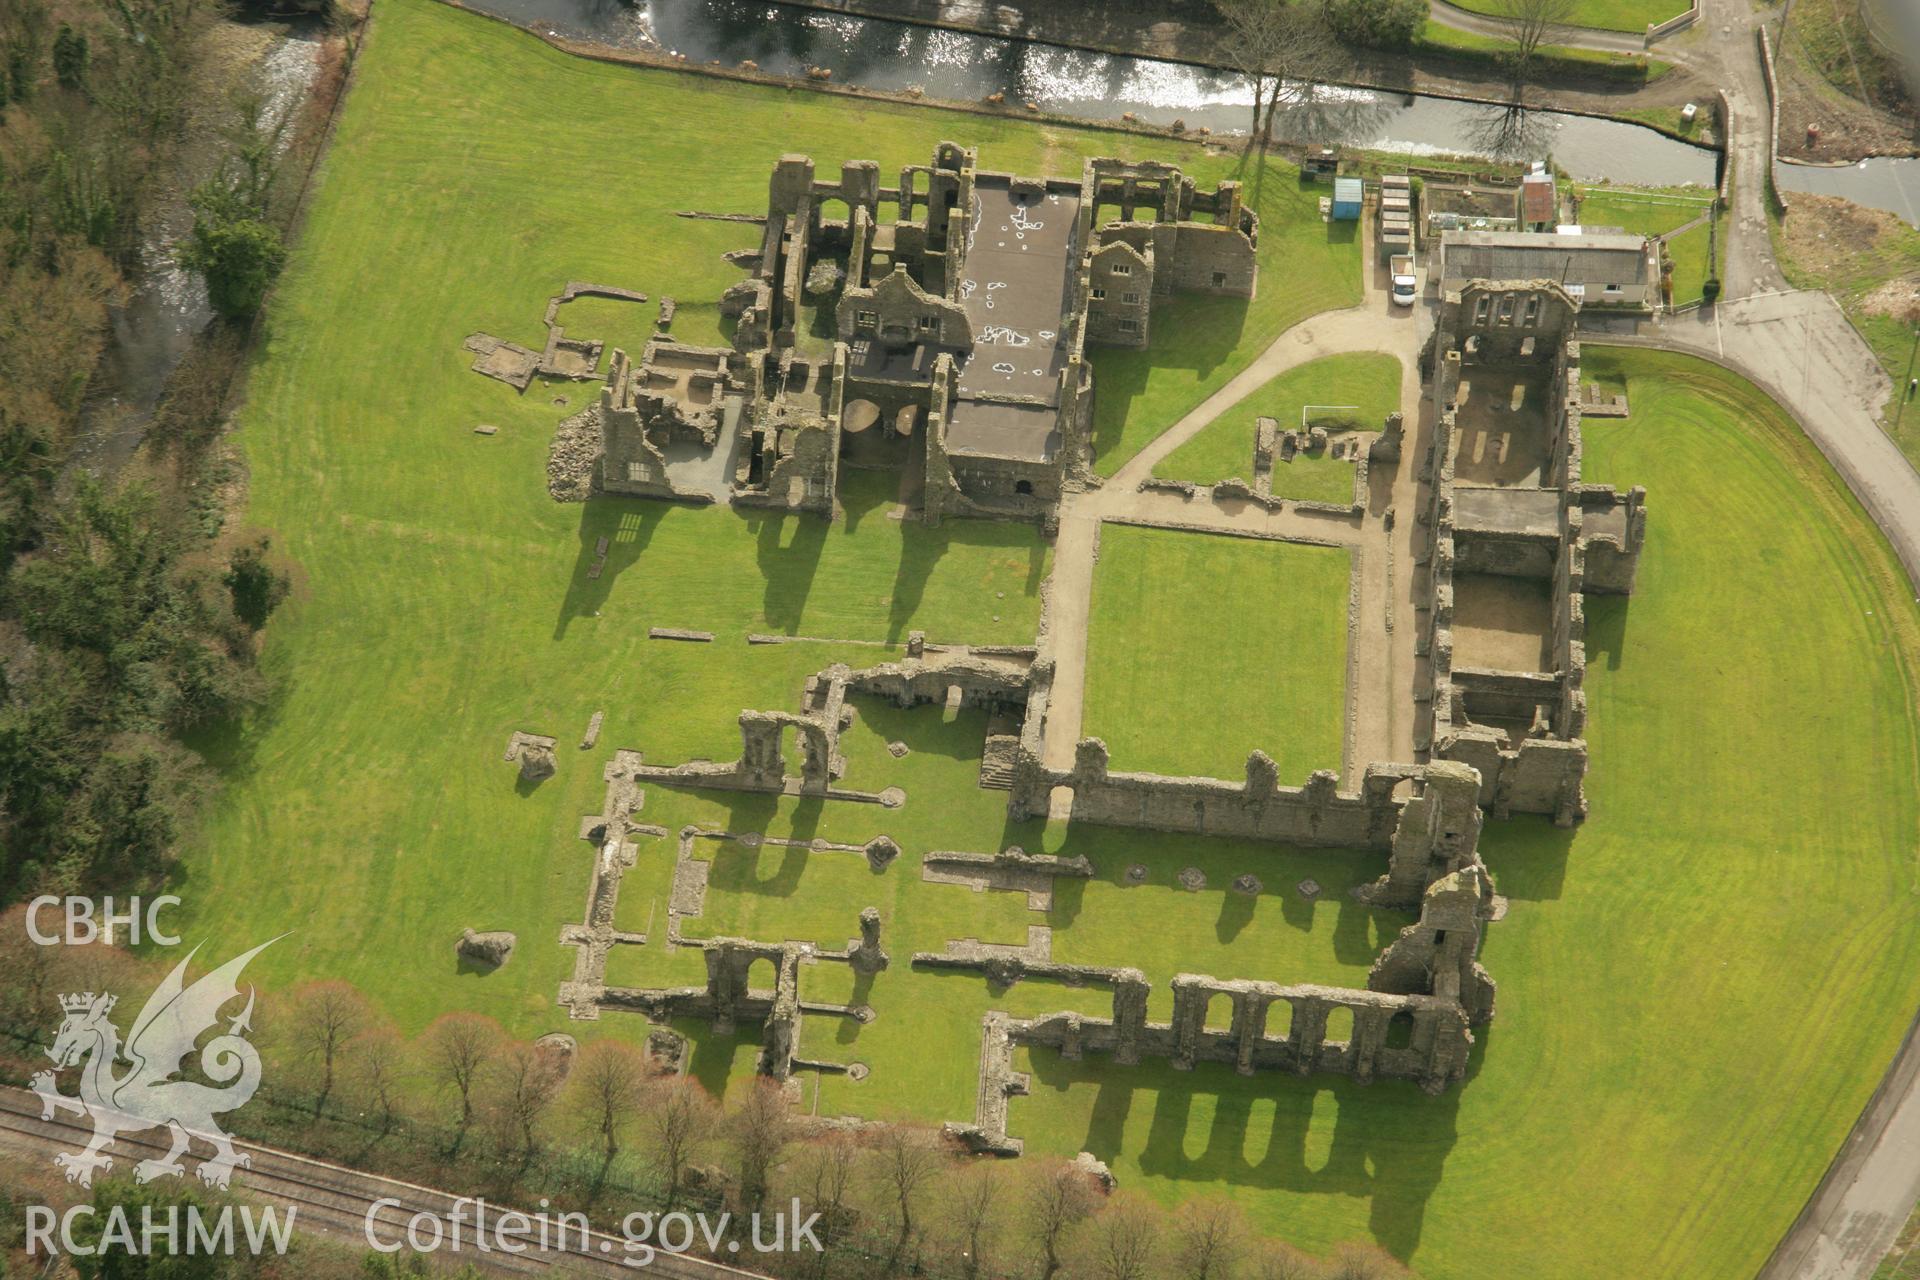 RCAHMW colour oblique aerial photograph of Neath Abbey. Taken on 16 March 2007 by Toby Driver